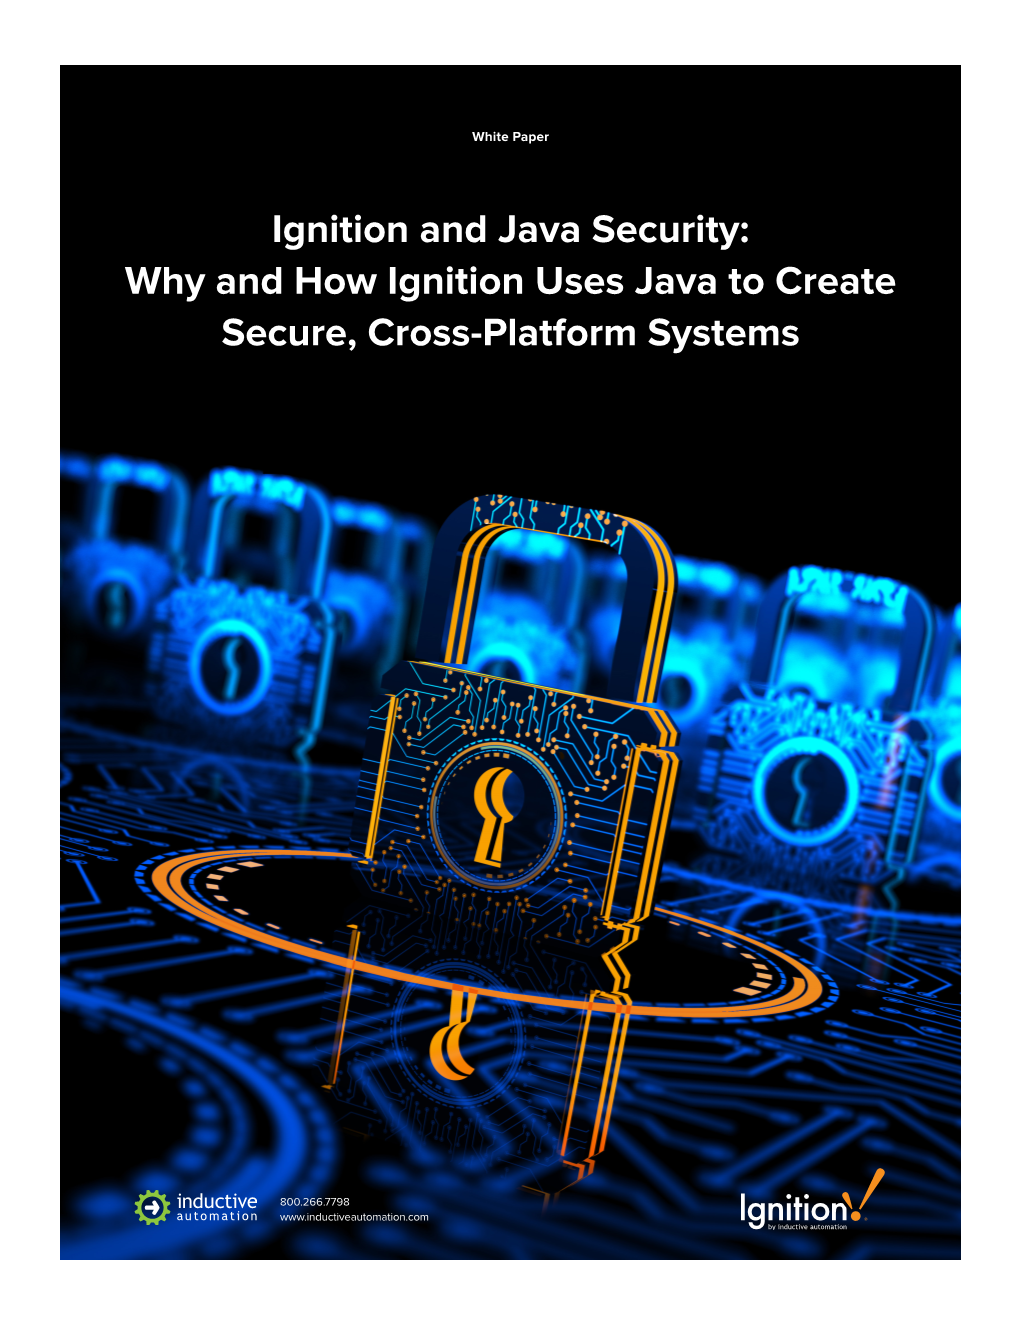 Ignition and Java Security: Why and How Ignition Uses Java to Create Secure, Cross-Platform Systems